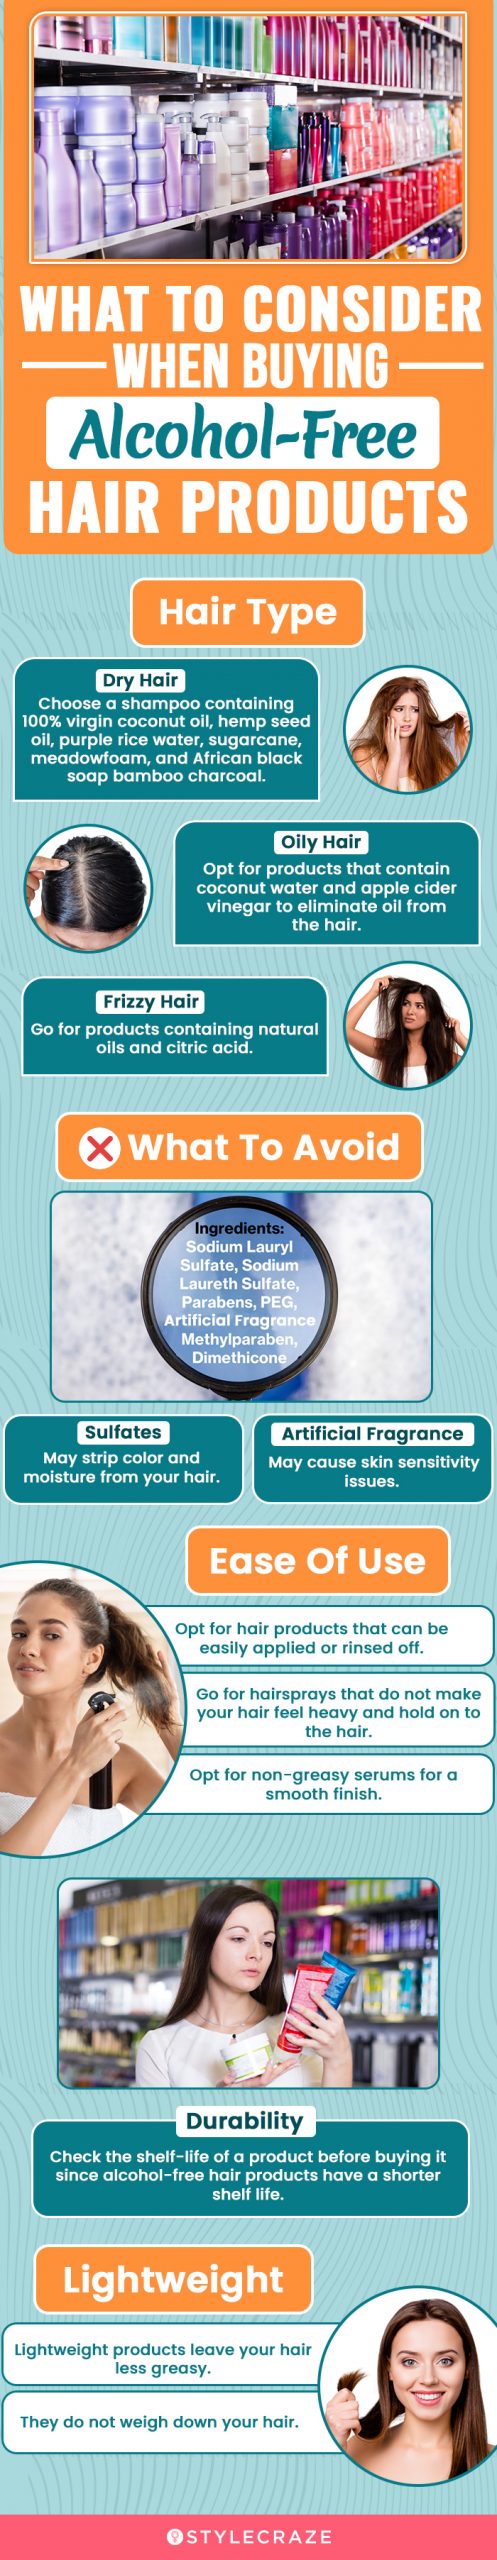 What To Consider When Buying Alcohol-Free Hair Products (infographic)